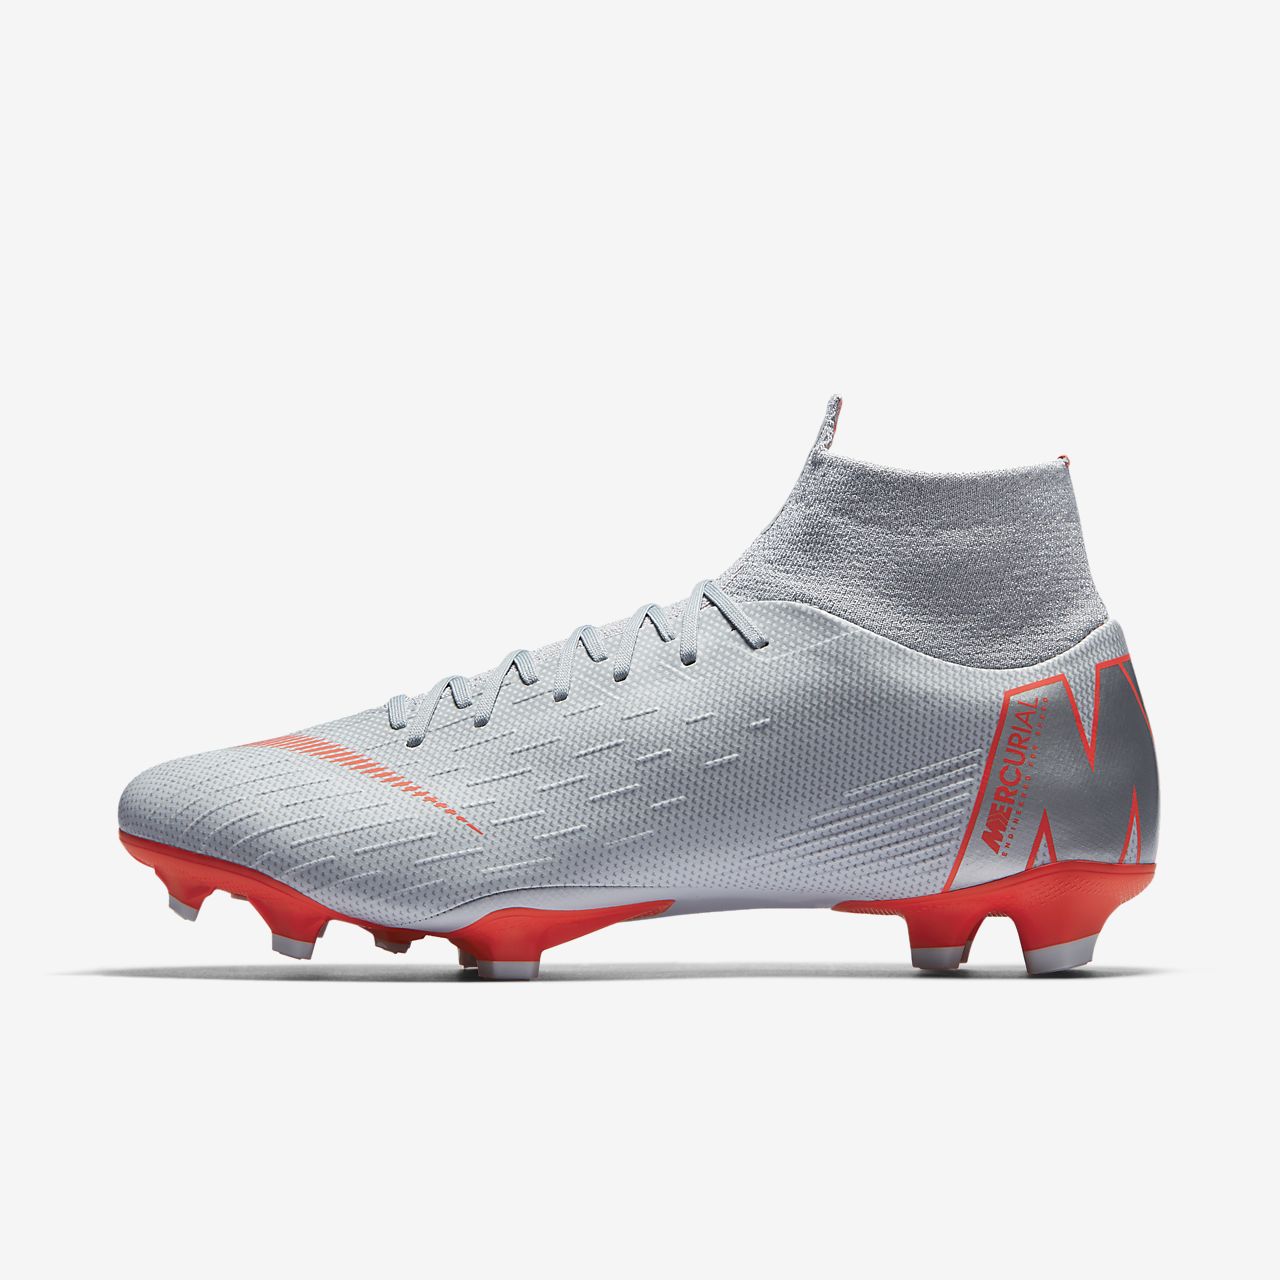 Nike Mercurial Superfly VI Pro AG PRO Review Apr 2020.